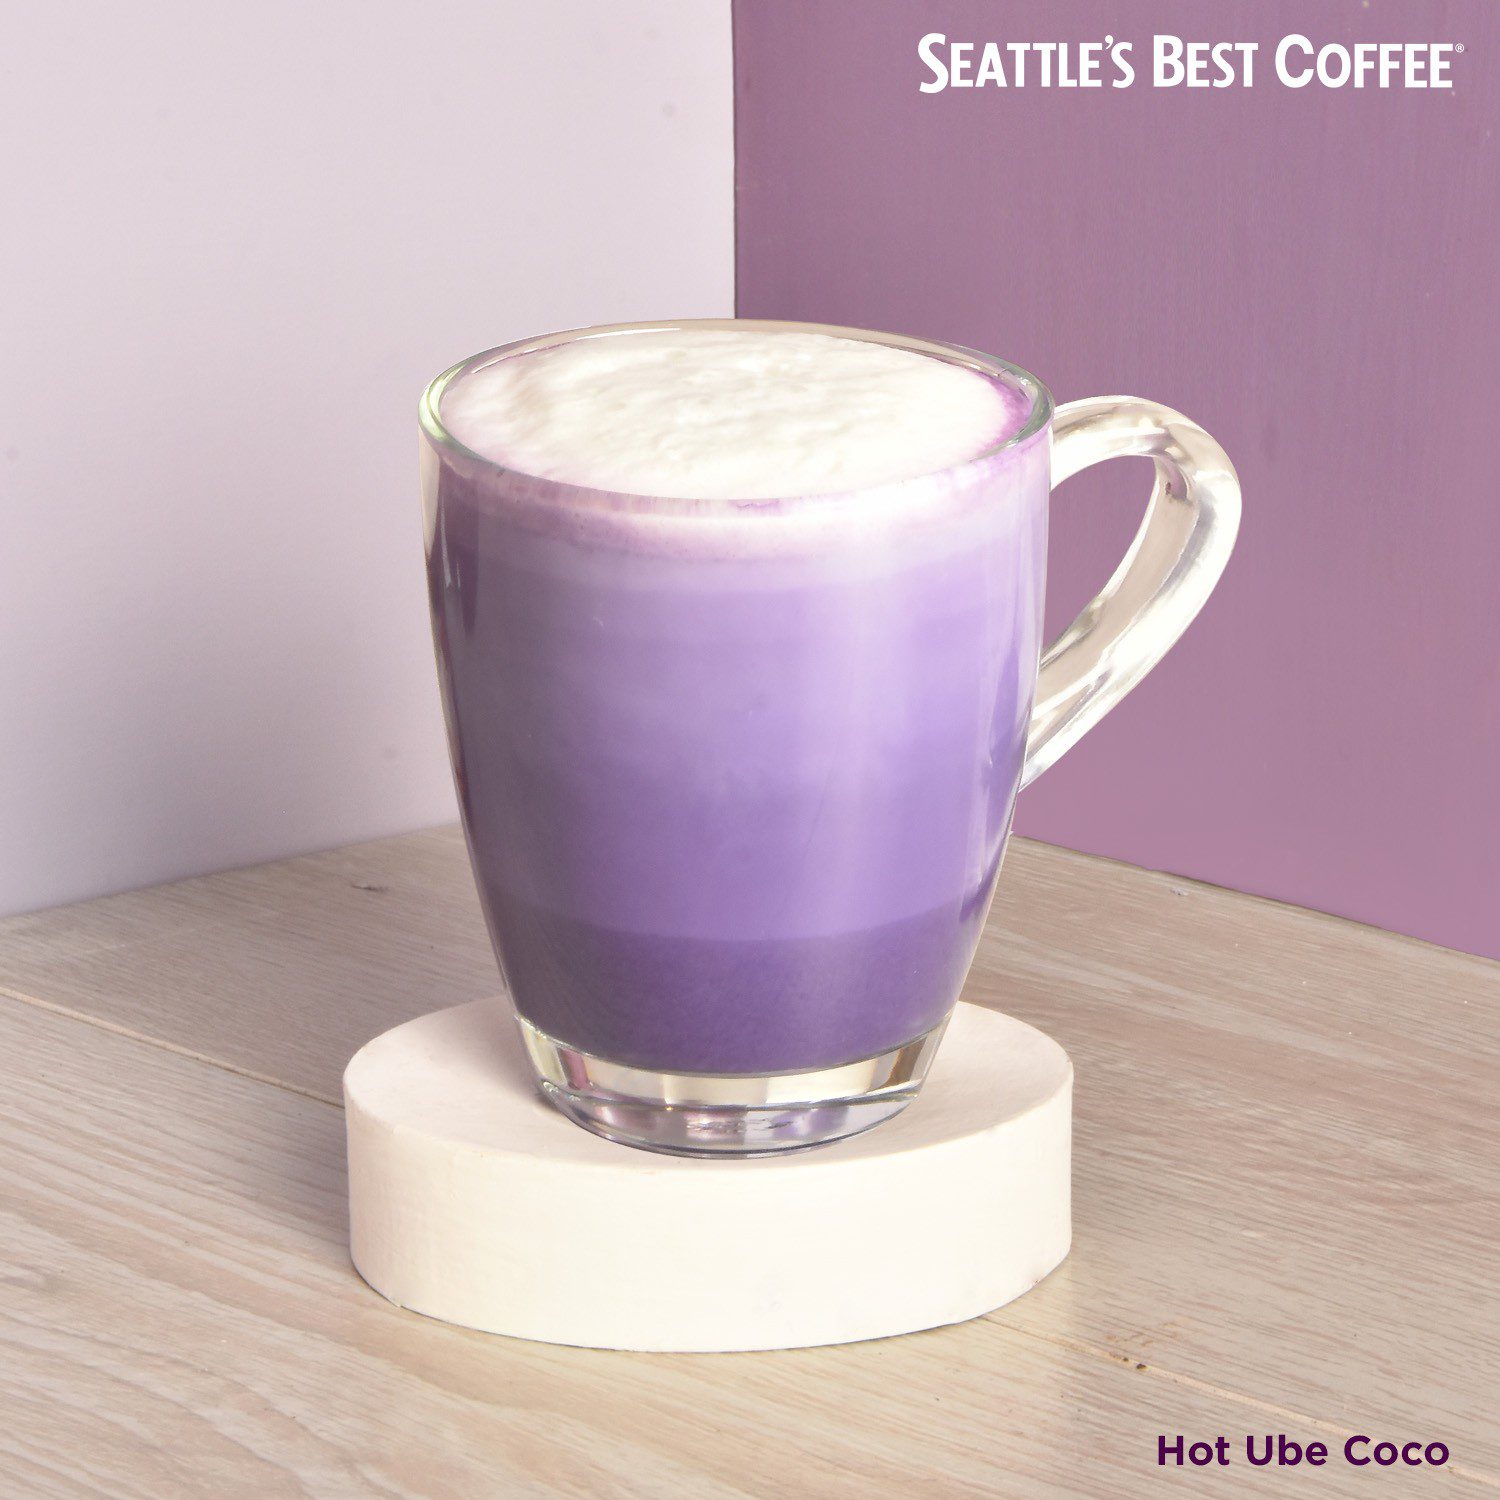 Seattle's Best Coffee Hot Ube Coco